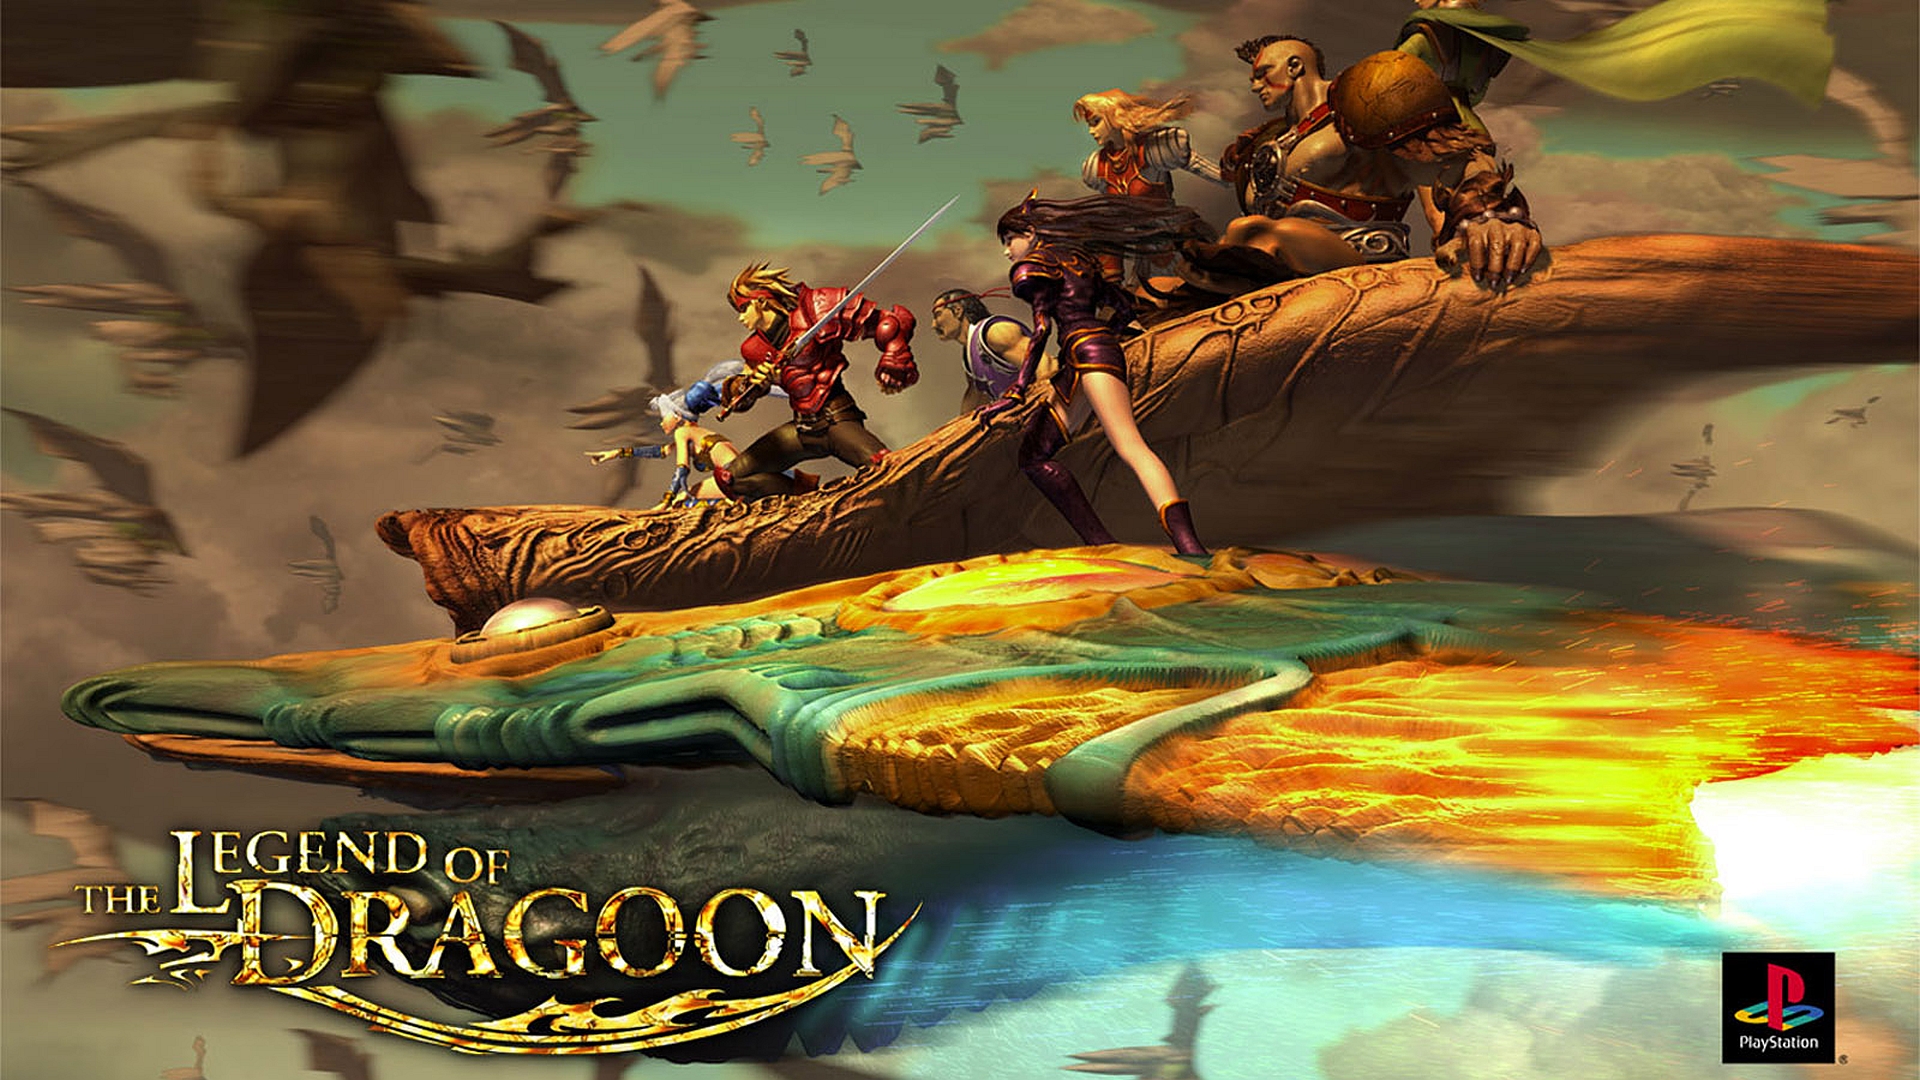 Video Game The Legend Of Dragoon 1920x1080